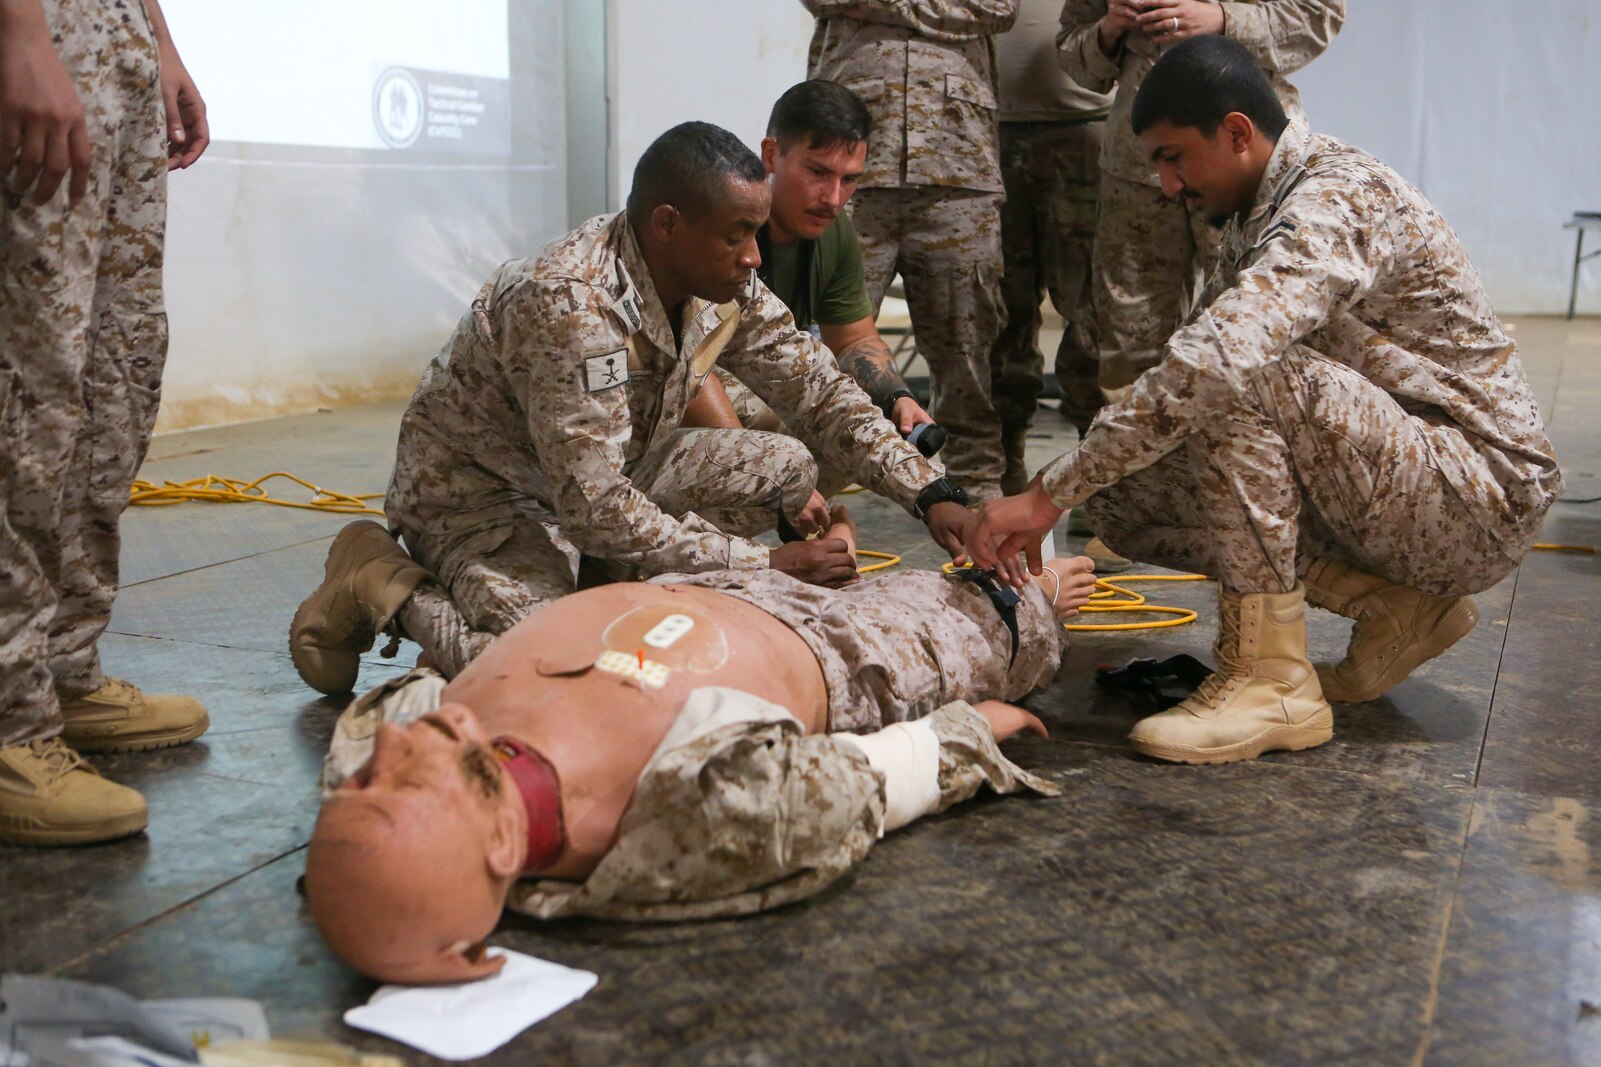 U.S. Navy Hospital Corpsman 2nd Class Austin Santistevan with Combat Logistics Regiment 1, 1st Marine Logistics Group, and Saudi Armed Forces members put a tourniquet on a simulated causality during a combat life saver course during exercise Native Fury 22